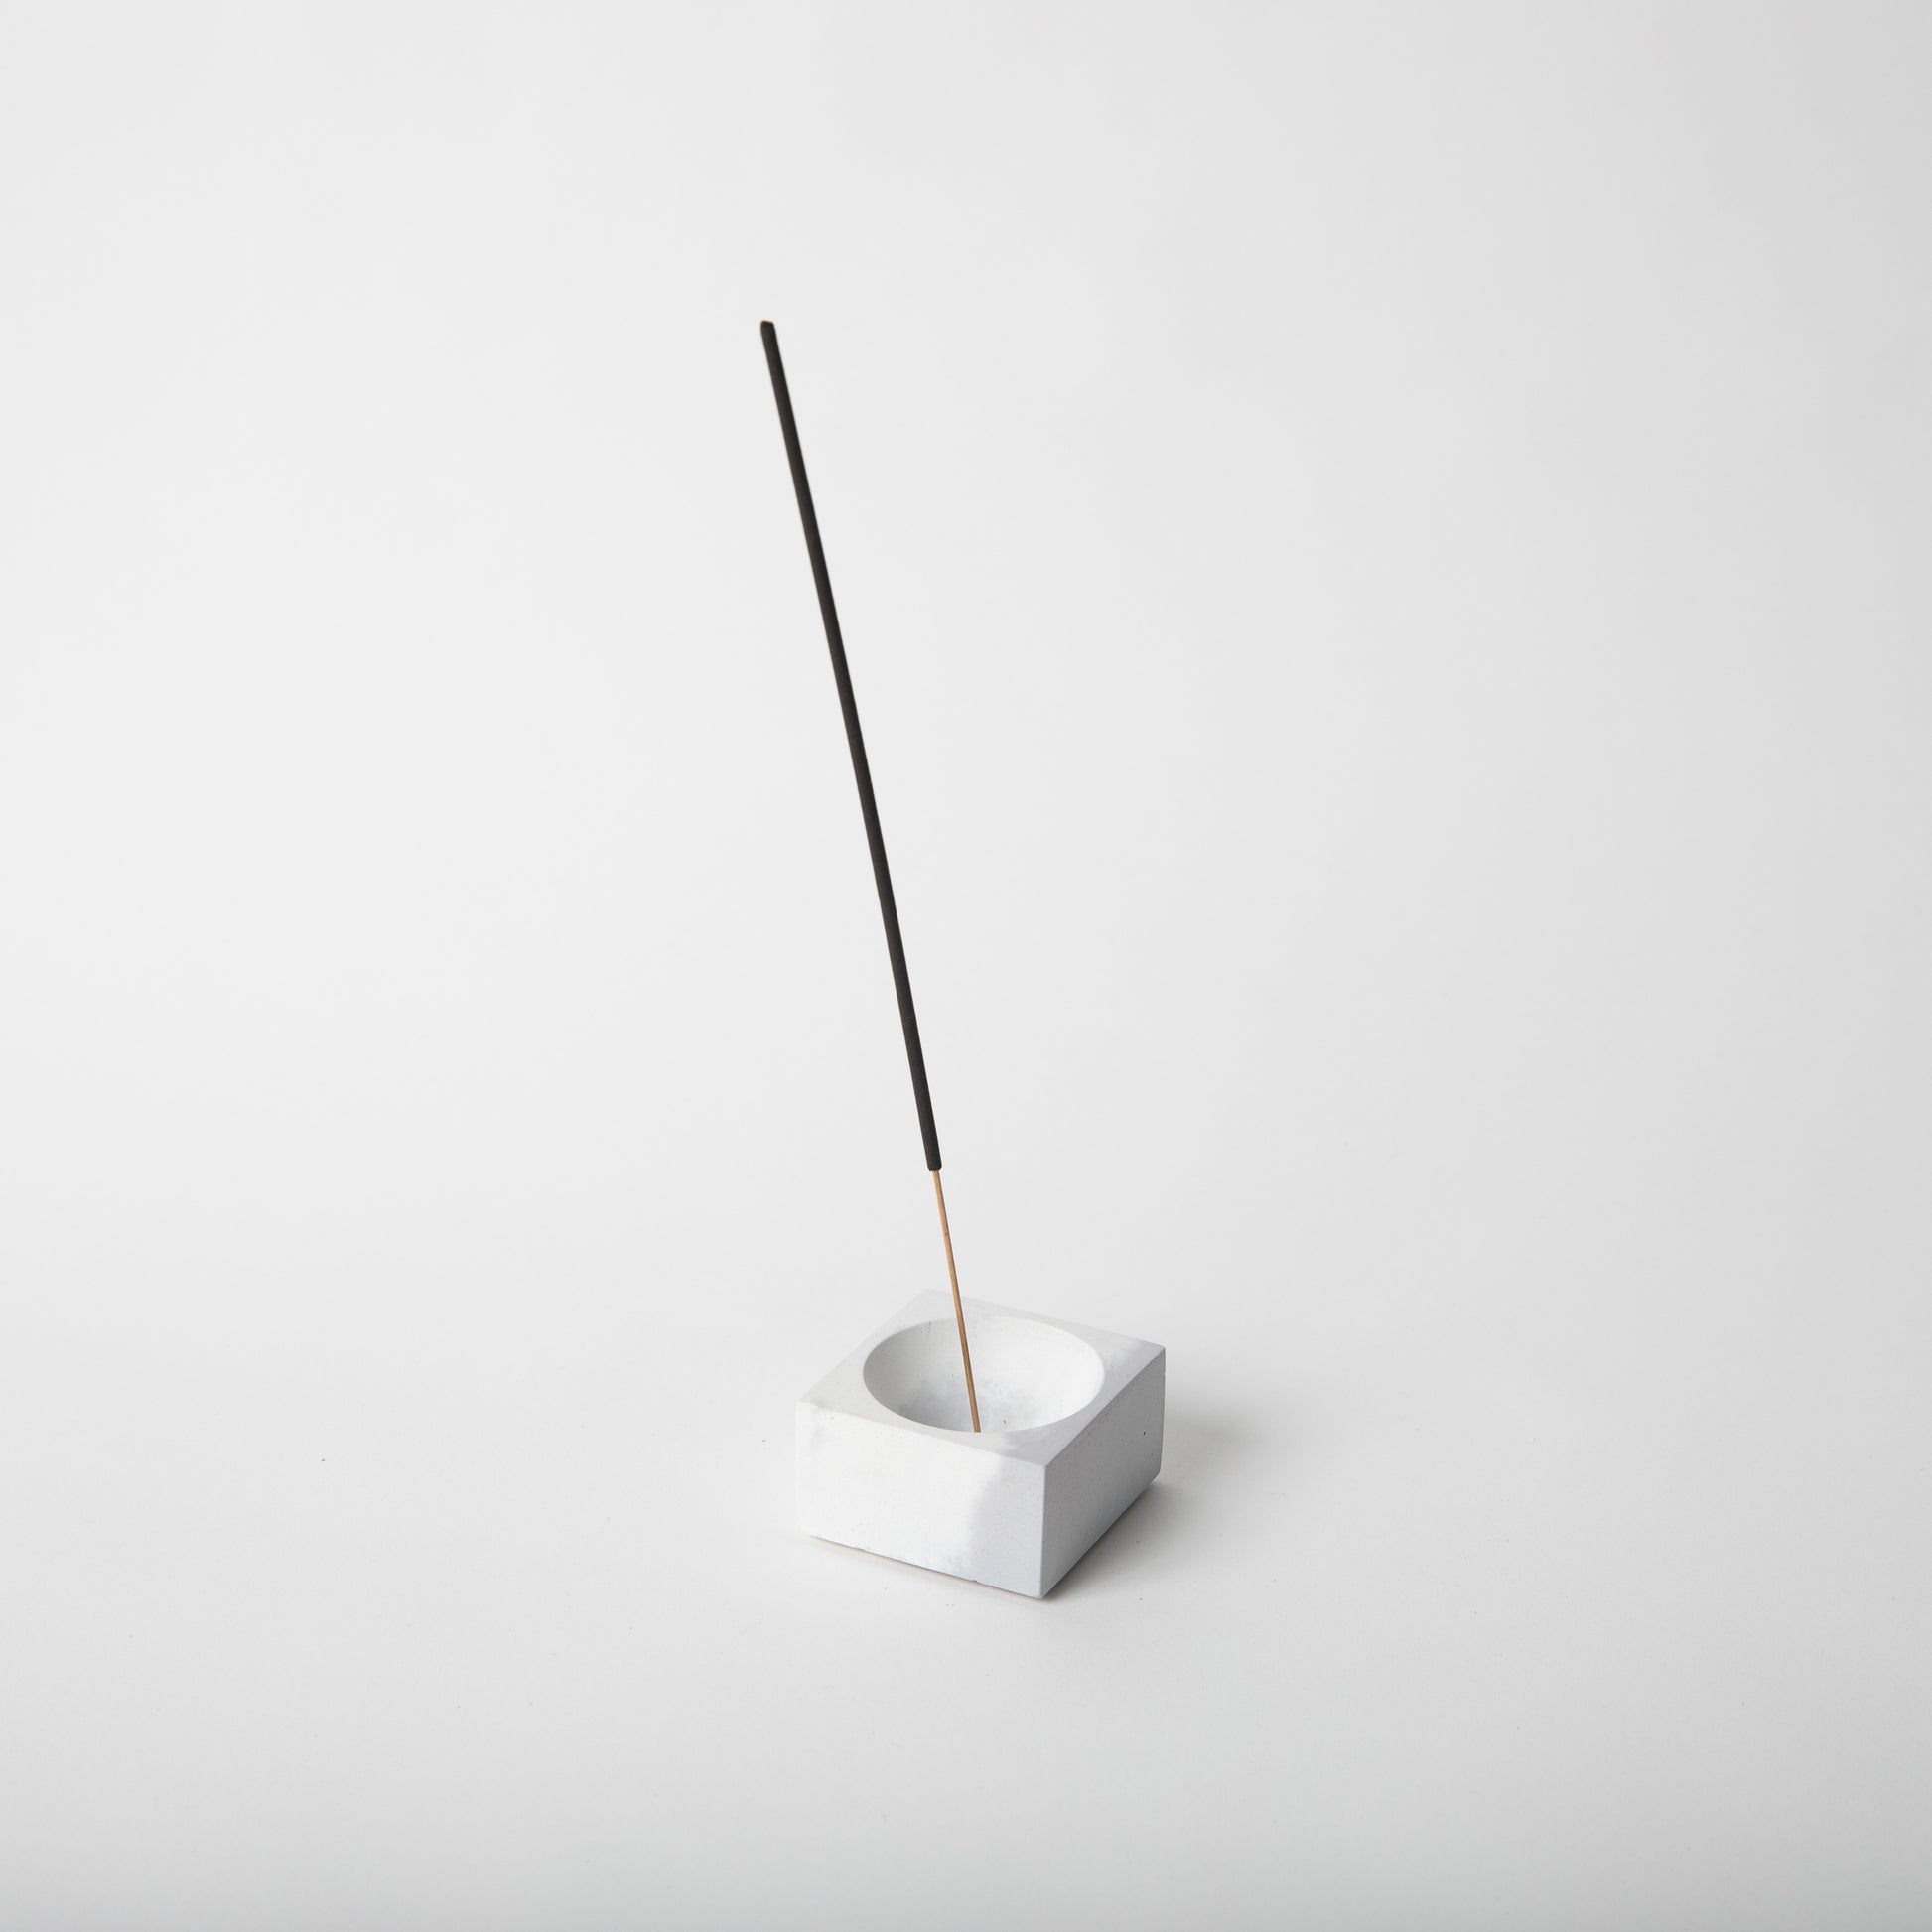 Square concrete incense holder in grey and white with incense stick.